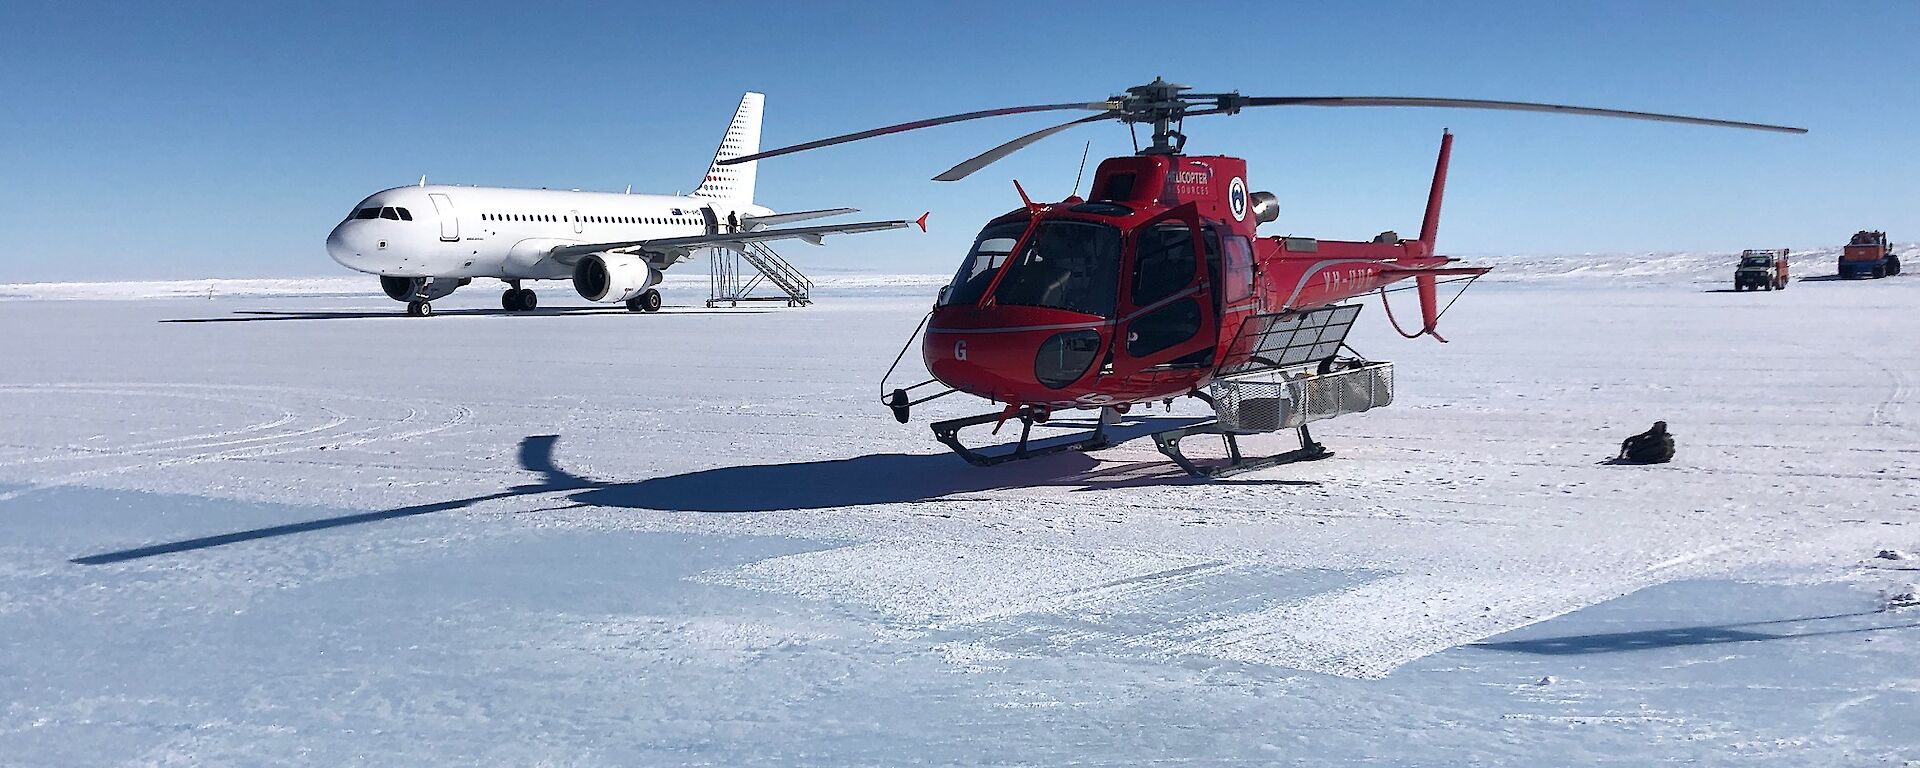 A helicopter and a jet aircraft on an ice runway